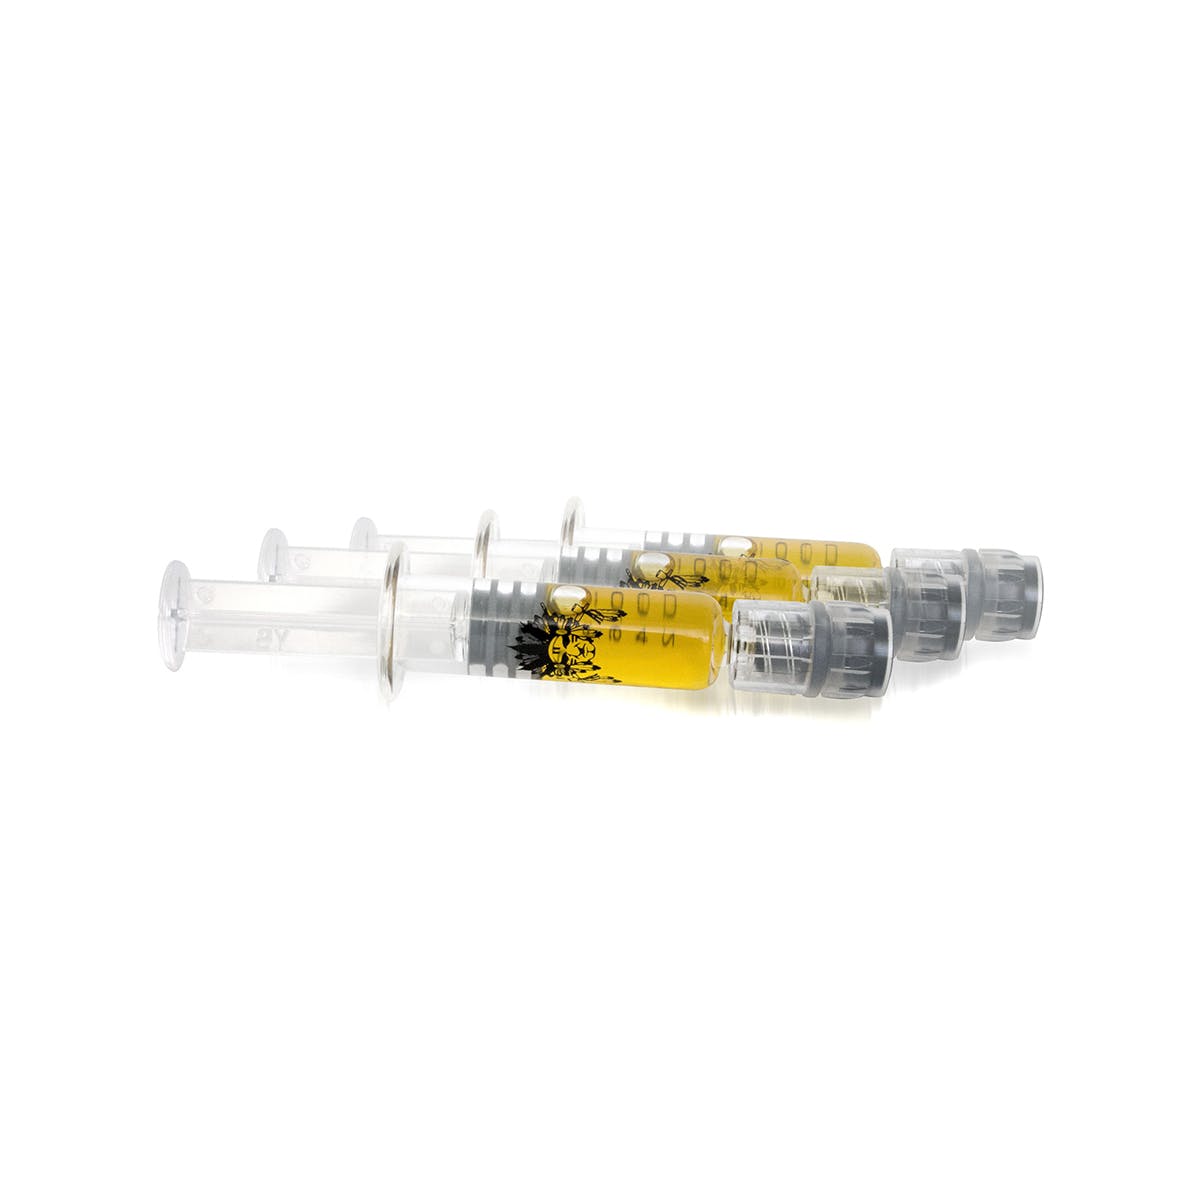 concentrate-magic-pipe-prefilled-syringe